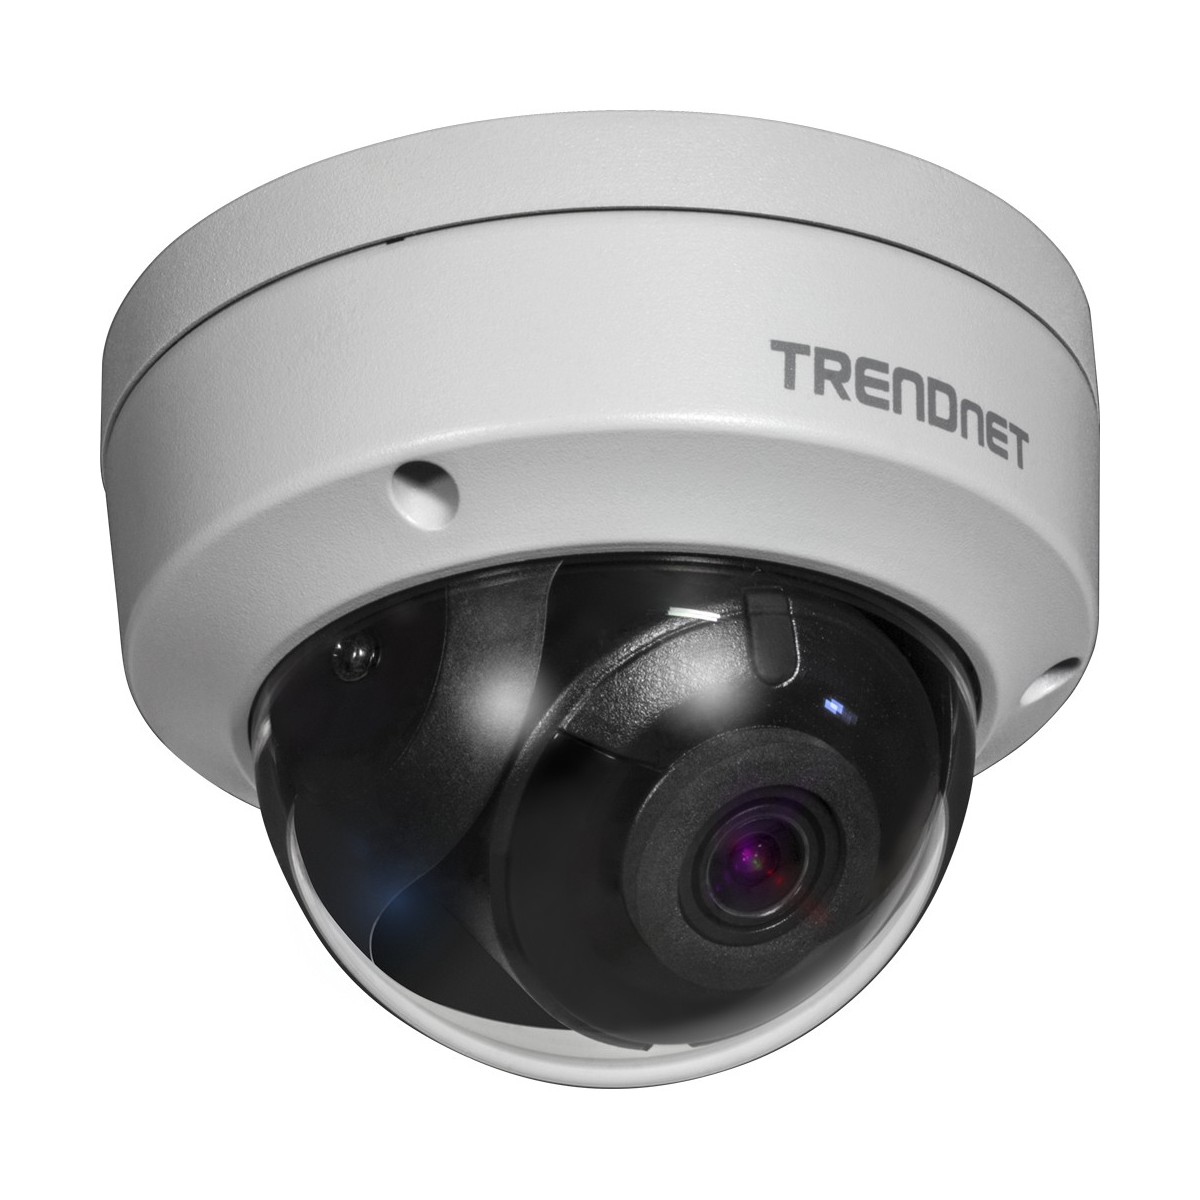 TRENDnet TV-IP1315PI - IP security camera - Indoor  outdoor - Wired - German - English - Spanish - French - Portuguese - CE - FC